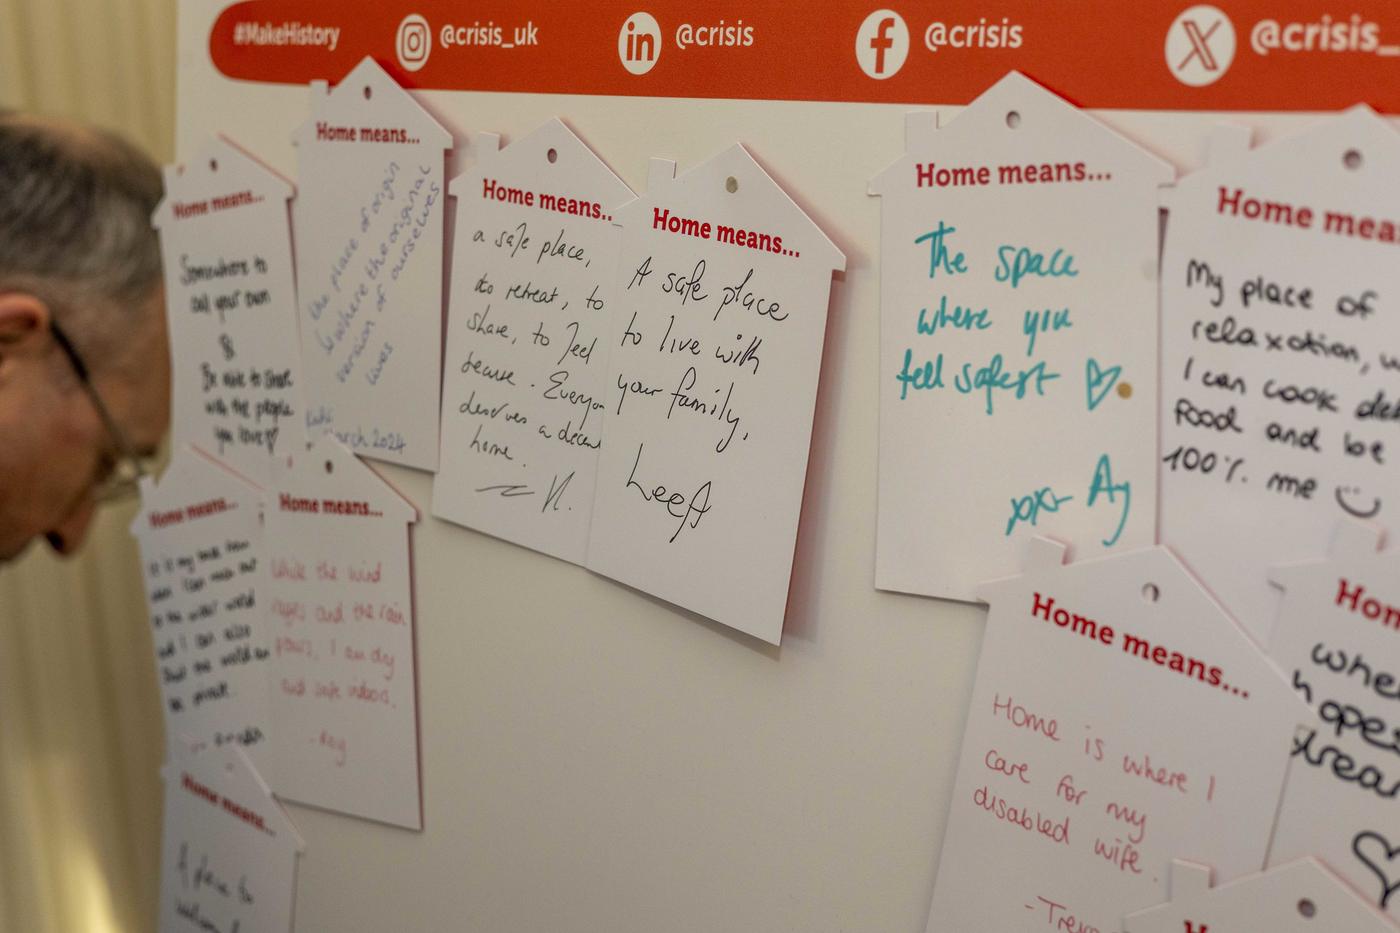 A board with handwritten messages about what home means